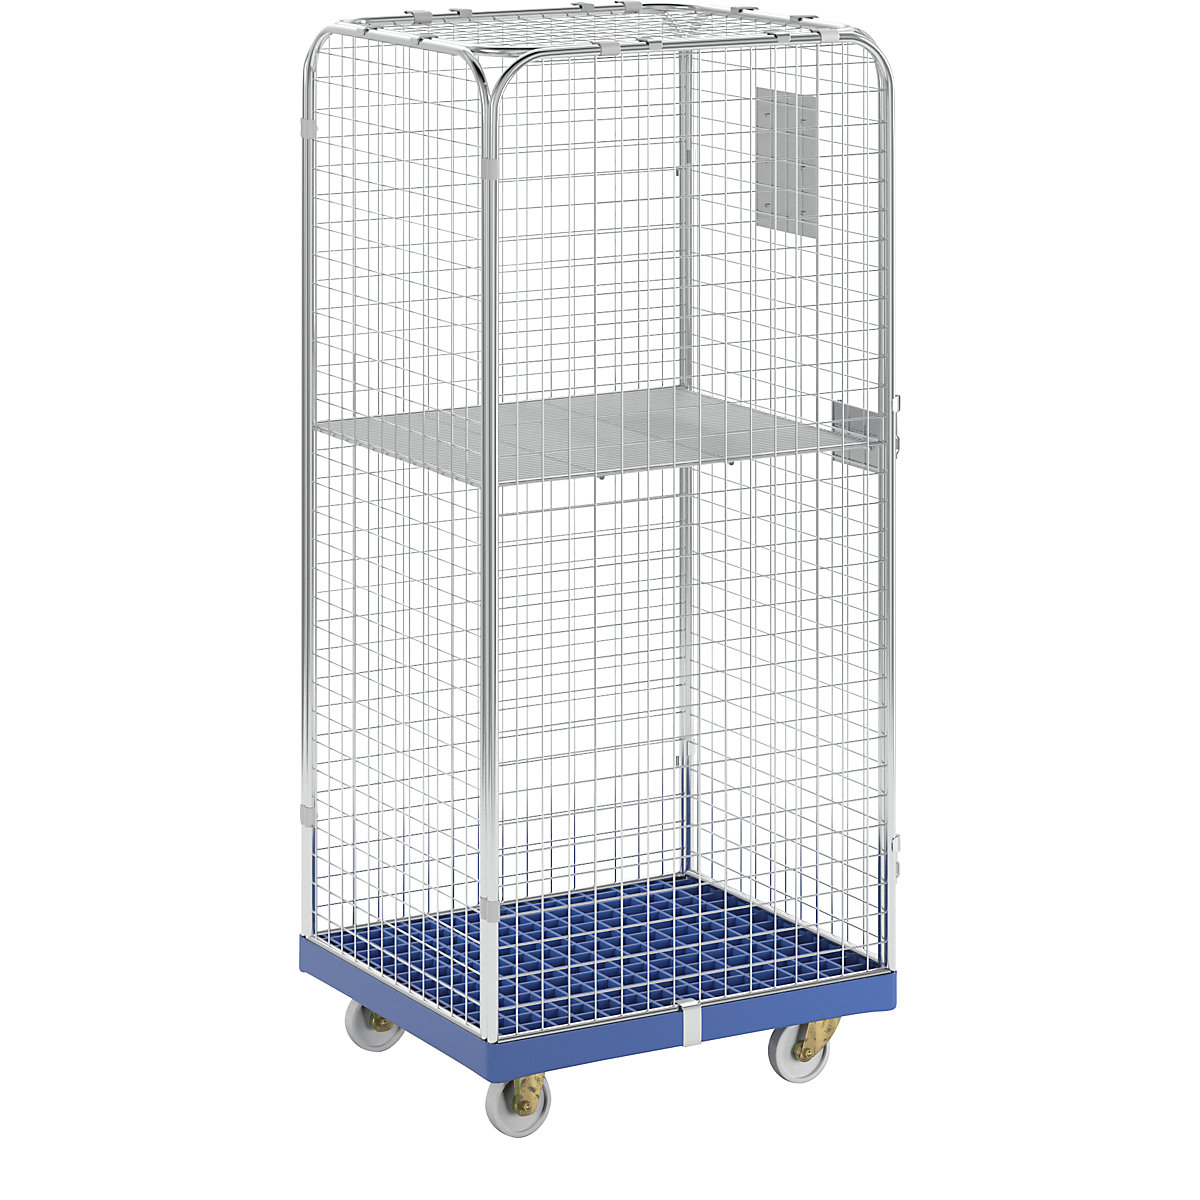 SAFE roll container, HxWxD 1800 x 720 x 810 mm, blue transport dolly-11